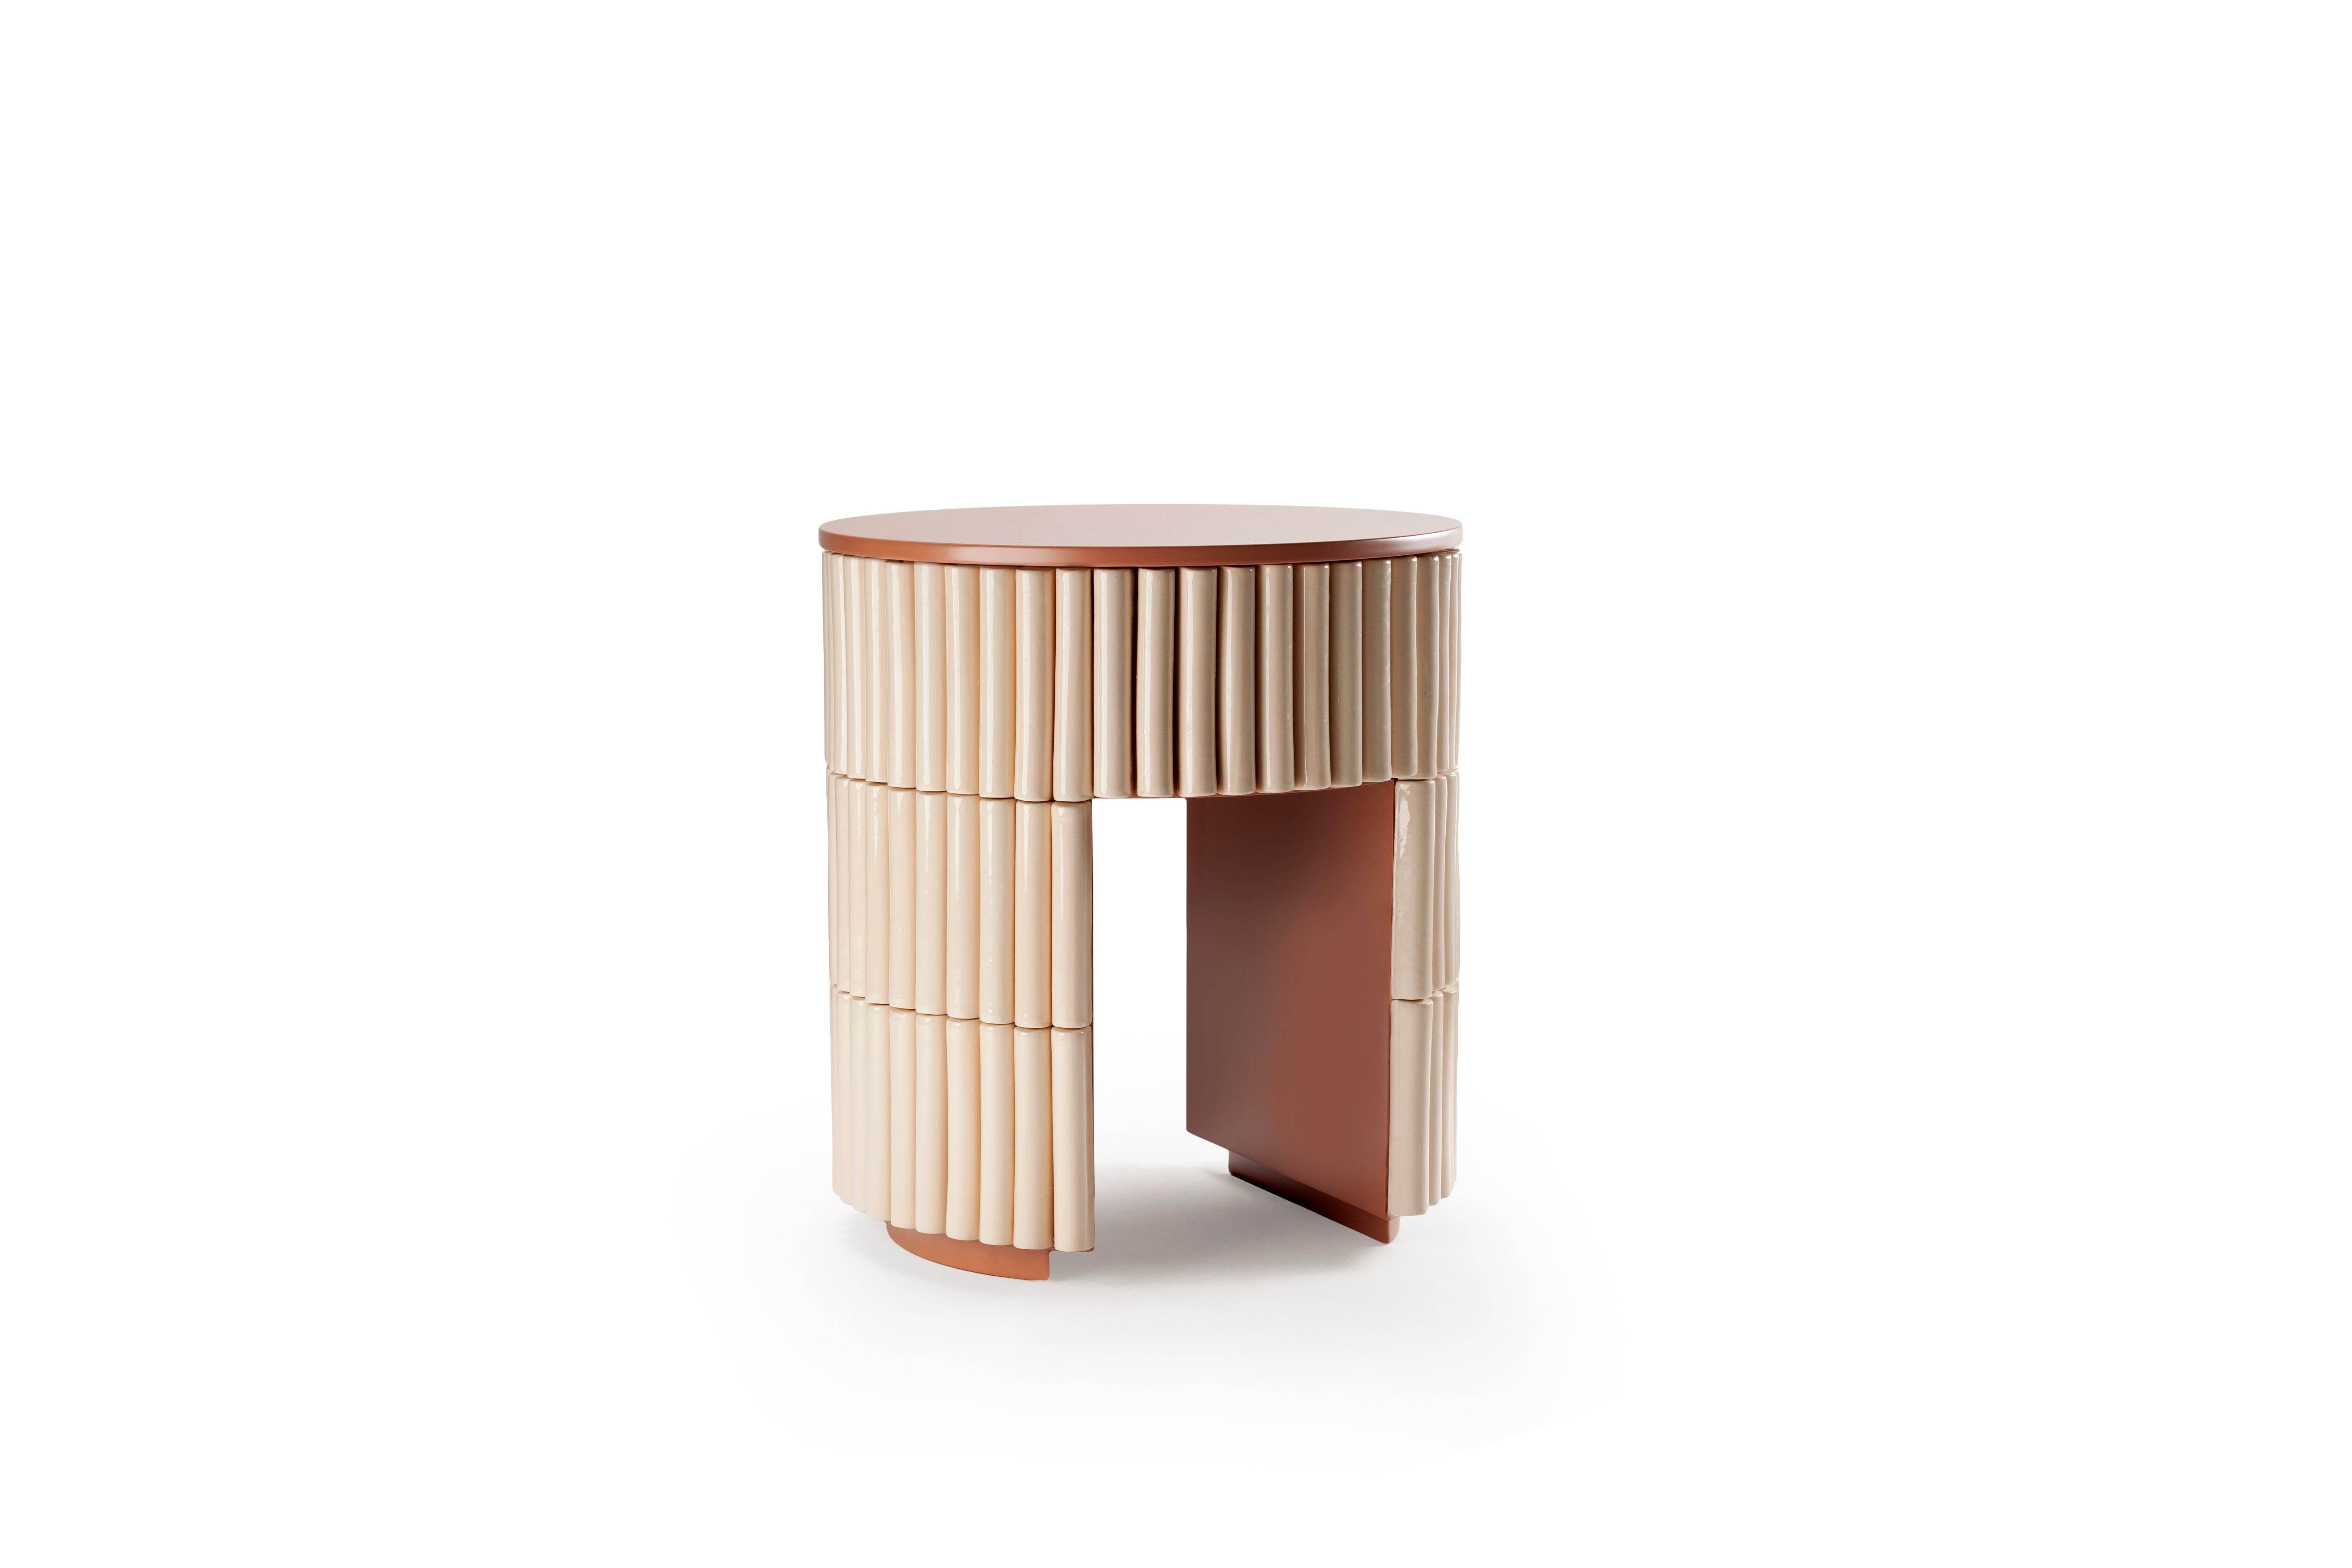 Nouvelle Vague side table by Dooq.
Measures: W 54 x D 54 cm x H 37.5 cm
Materials: Lacquered wood, Mar di Giava ceramic tiles.

Dooq is a design company dedicated to celebrate the luxury of living. Creating designs that stimulate the senses,